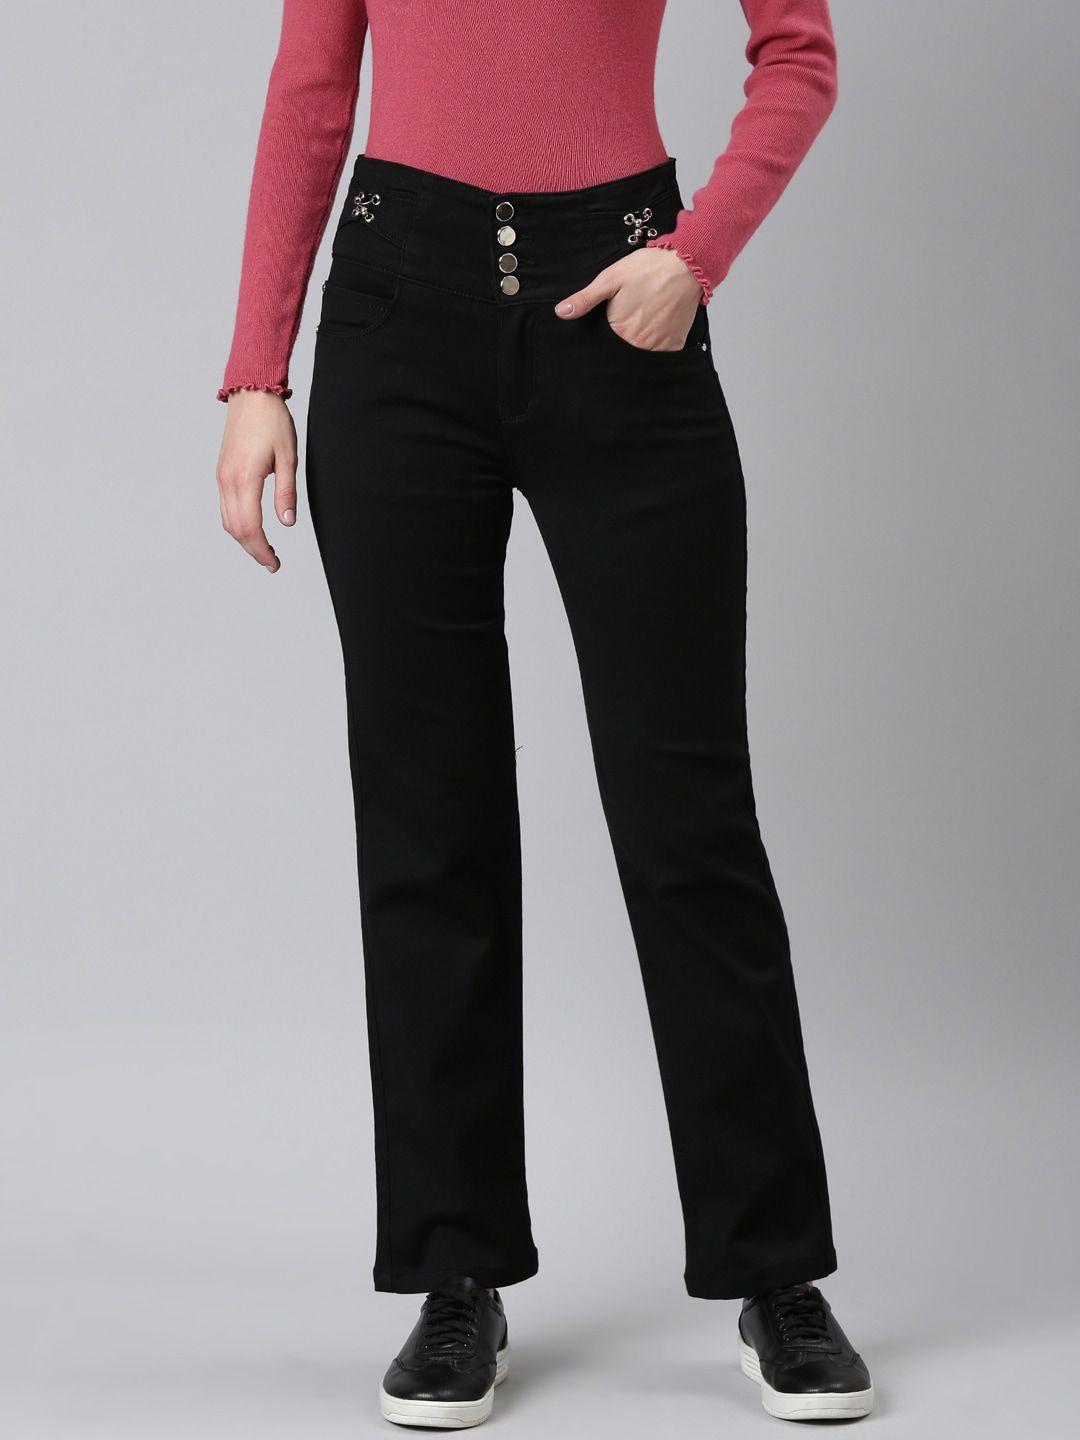 showoff-women-jean-high-rise-straight-fit-stretchable-jeans